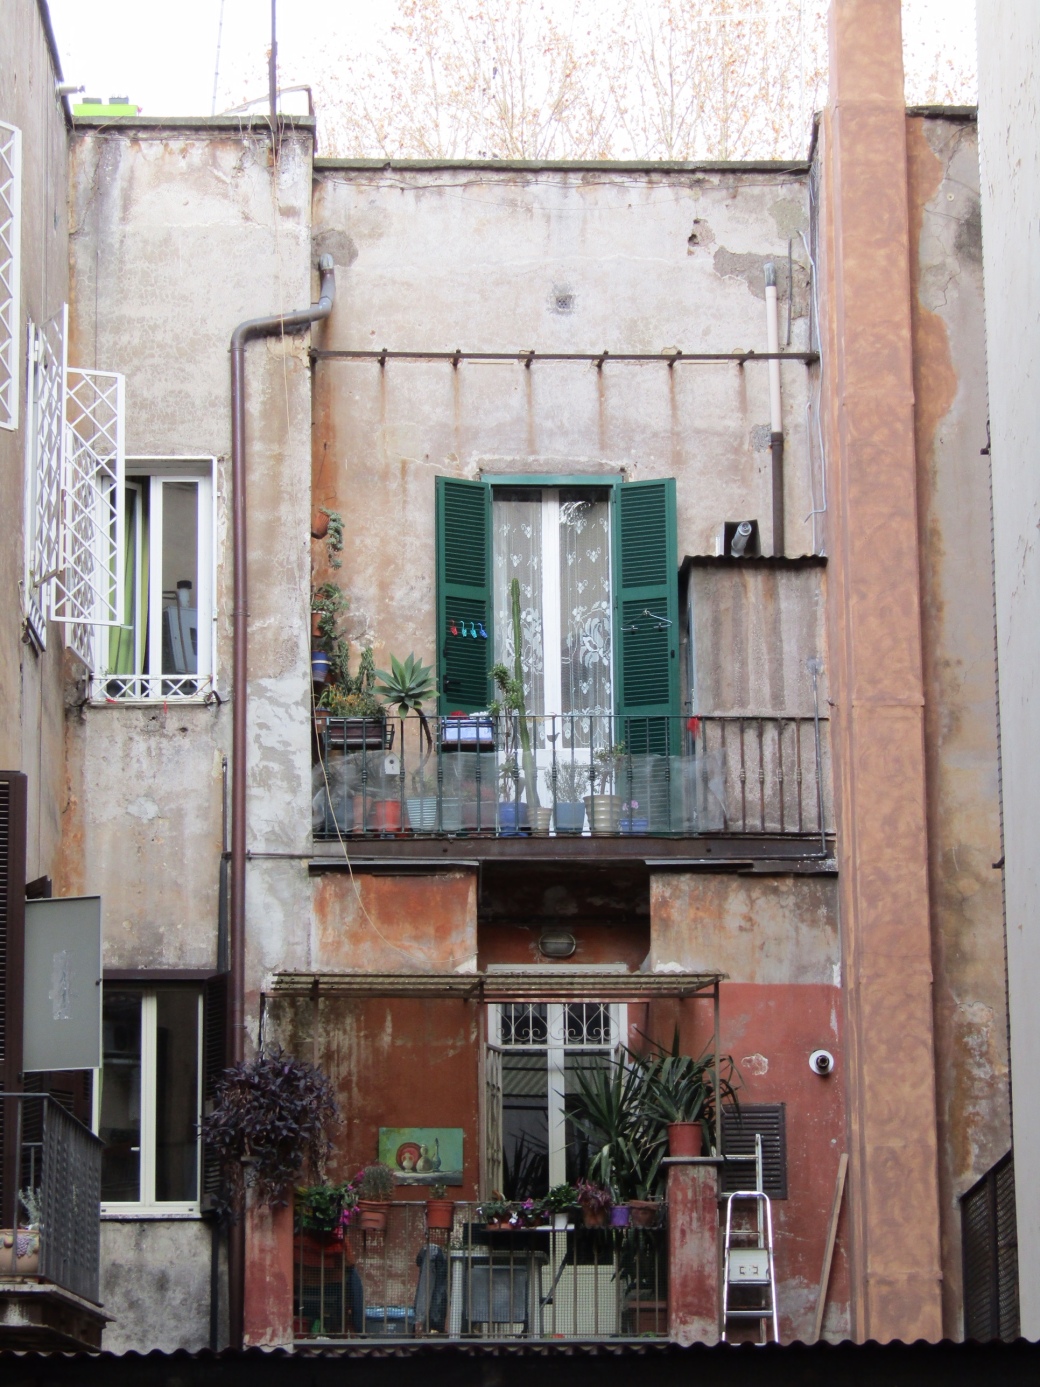 A typical Rome apartment building. The disrepair of the outside is quite beautiful, fitting into the rustic look that dominates this ancient city.